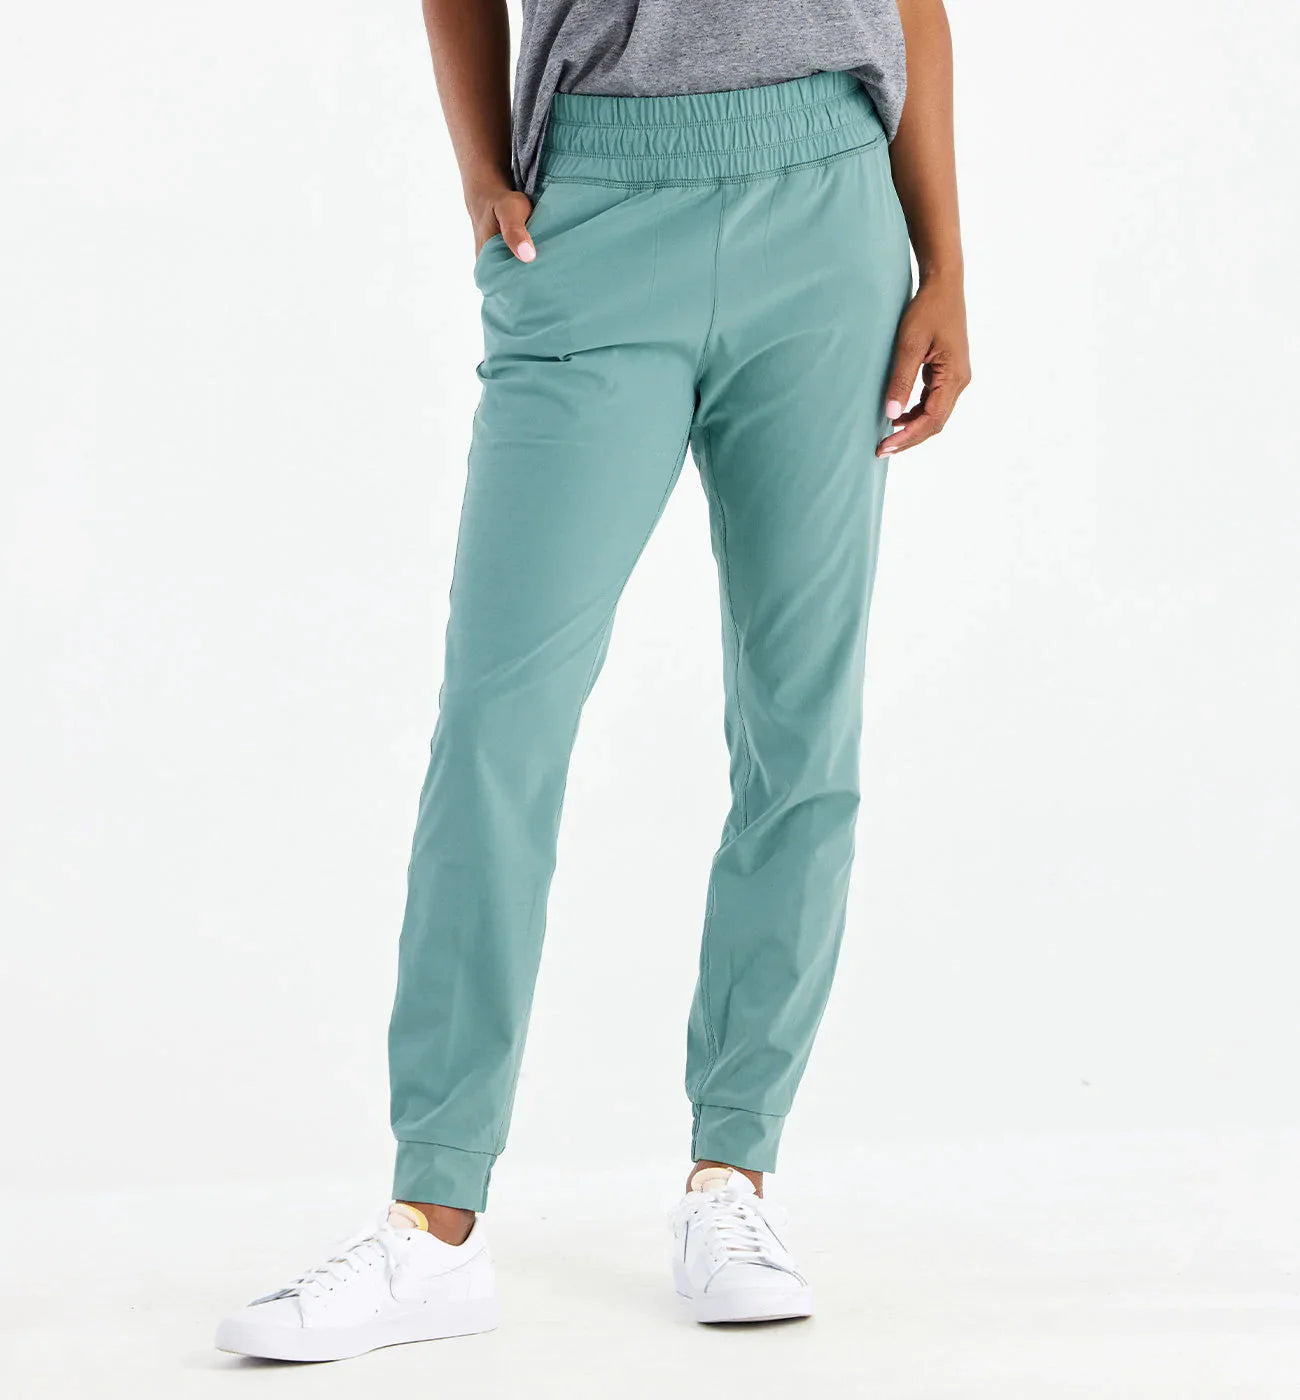 FF Women's Bamboo-Lined Breeze Pull-On Jogger